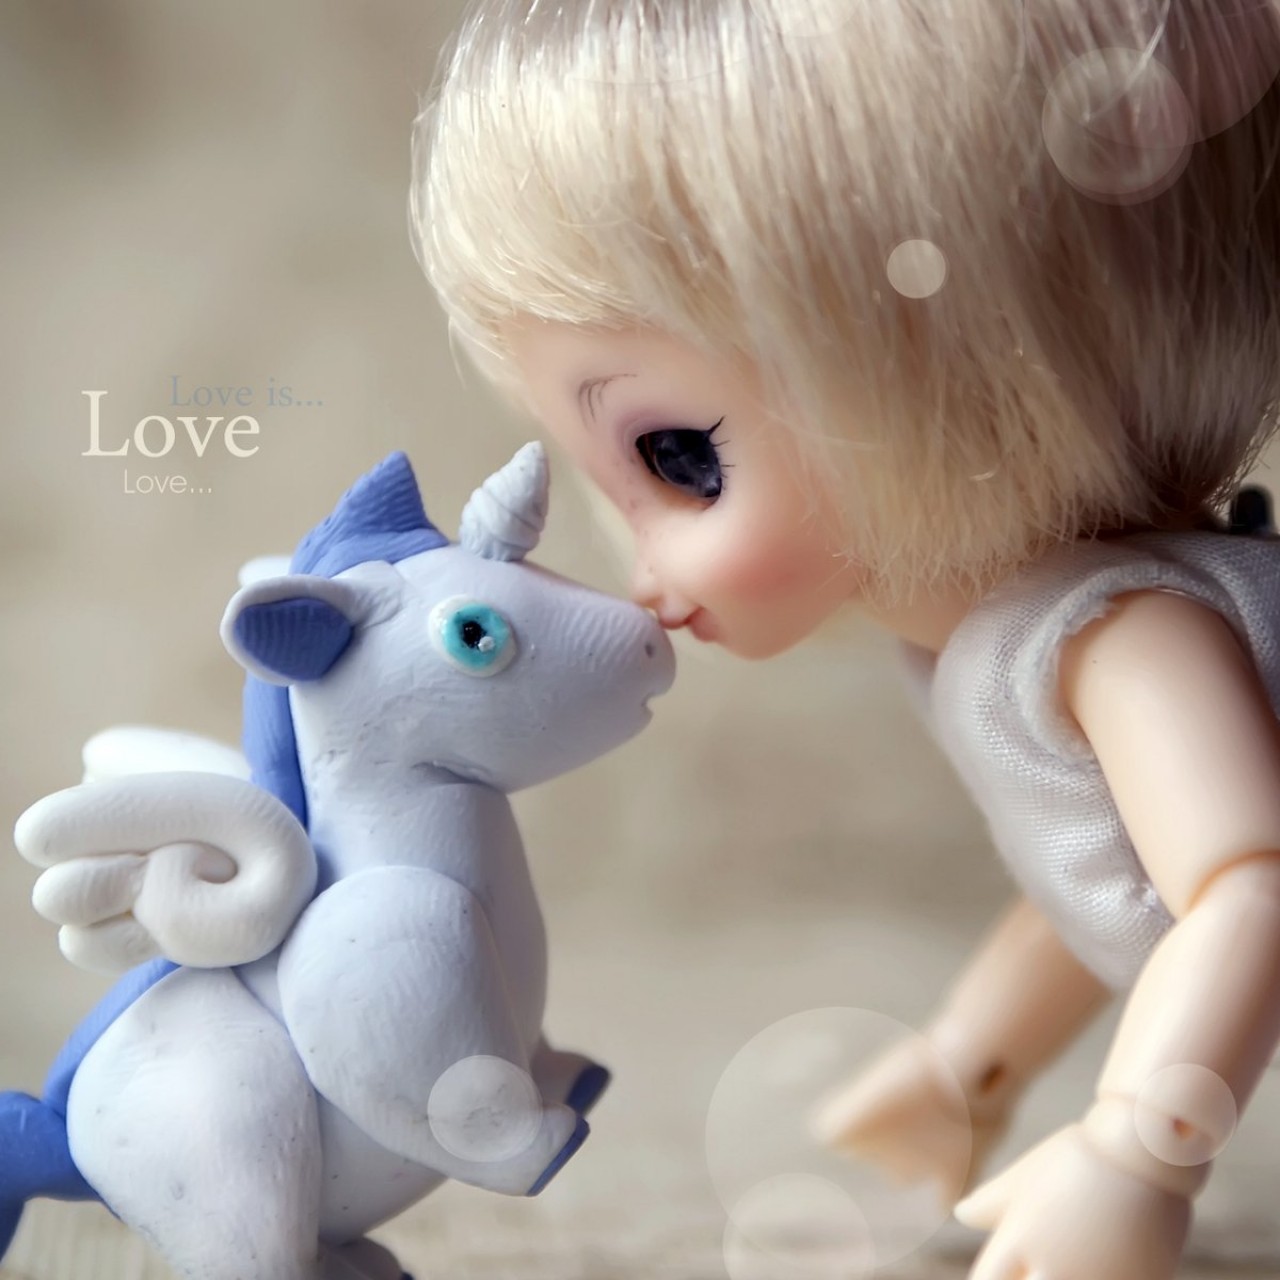 Cute Doll Wallpapers For Love Cute Kiss Dolls All